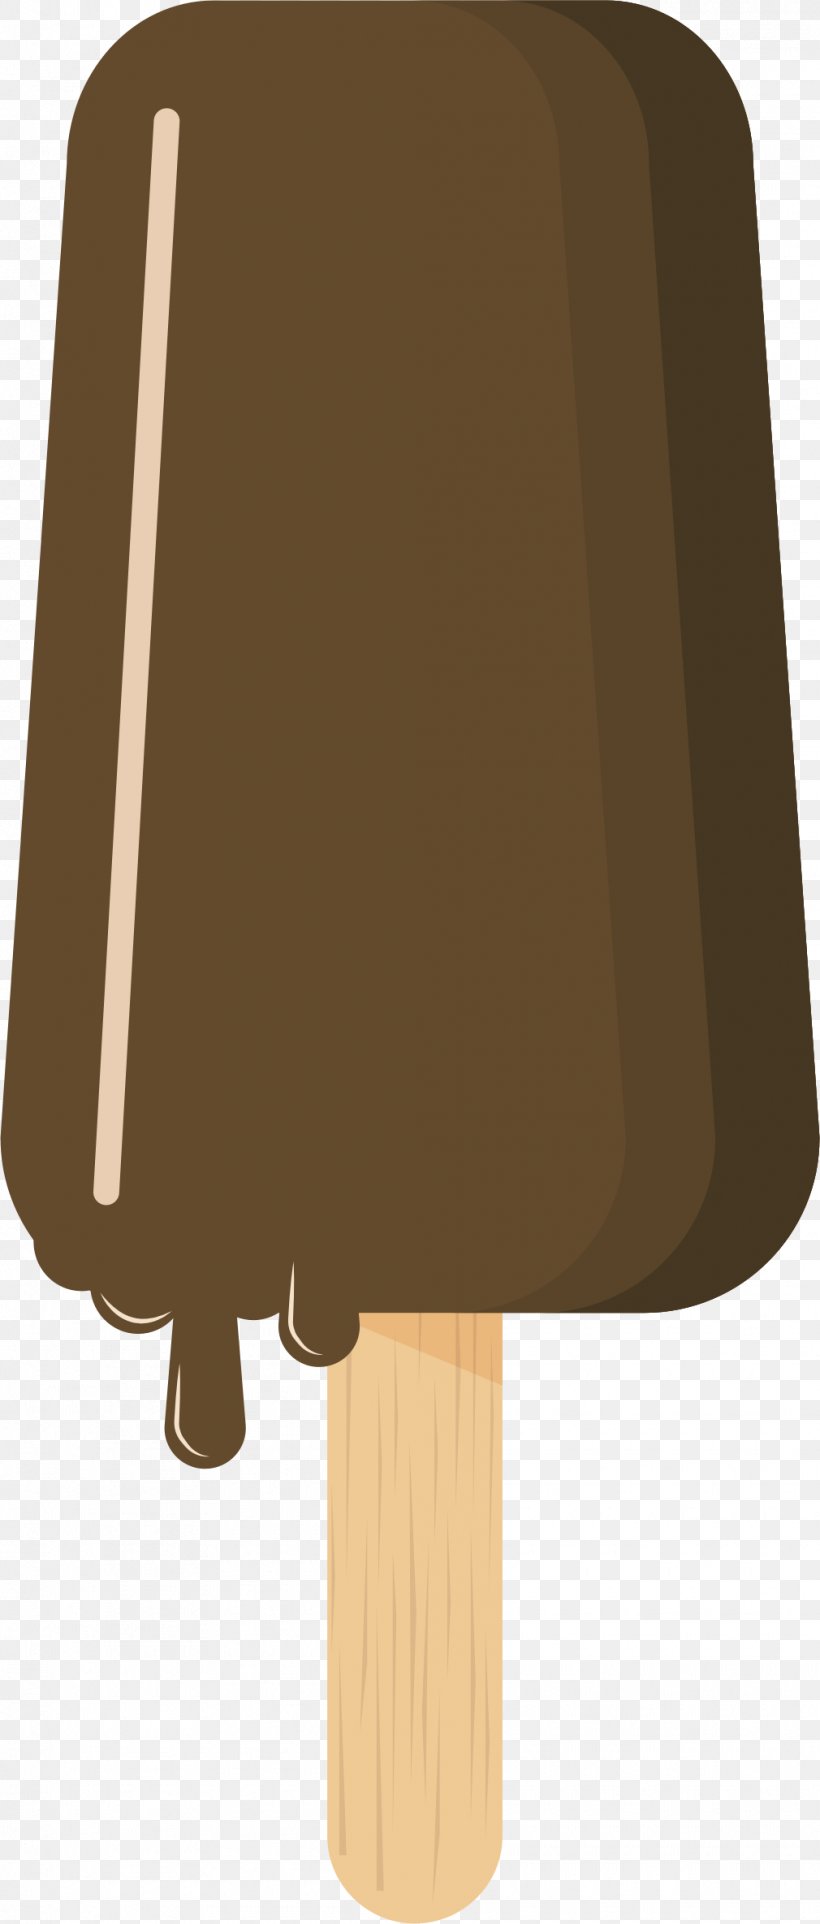 Confectionery Frozen Food Clip Art Ice Cream Chocolate Bar, PNG, 1010x2370px, Confectionery, Cartoon, Chocolate, Chocolate Bar, Food Download Free